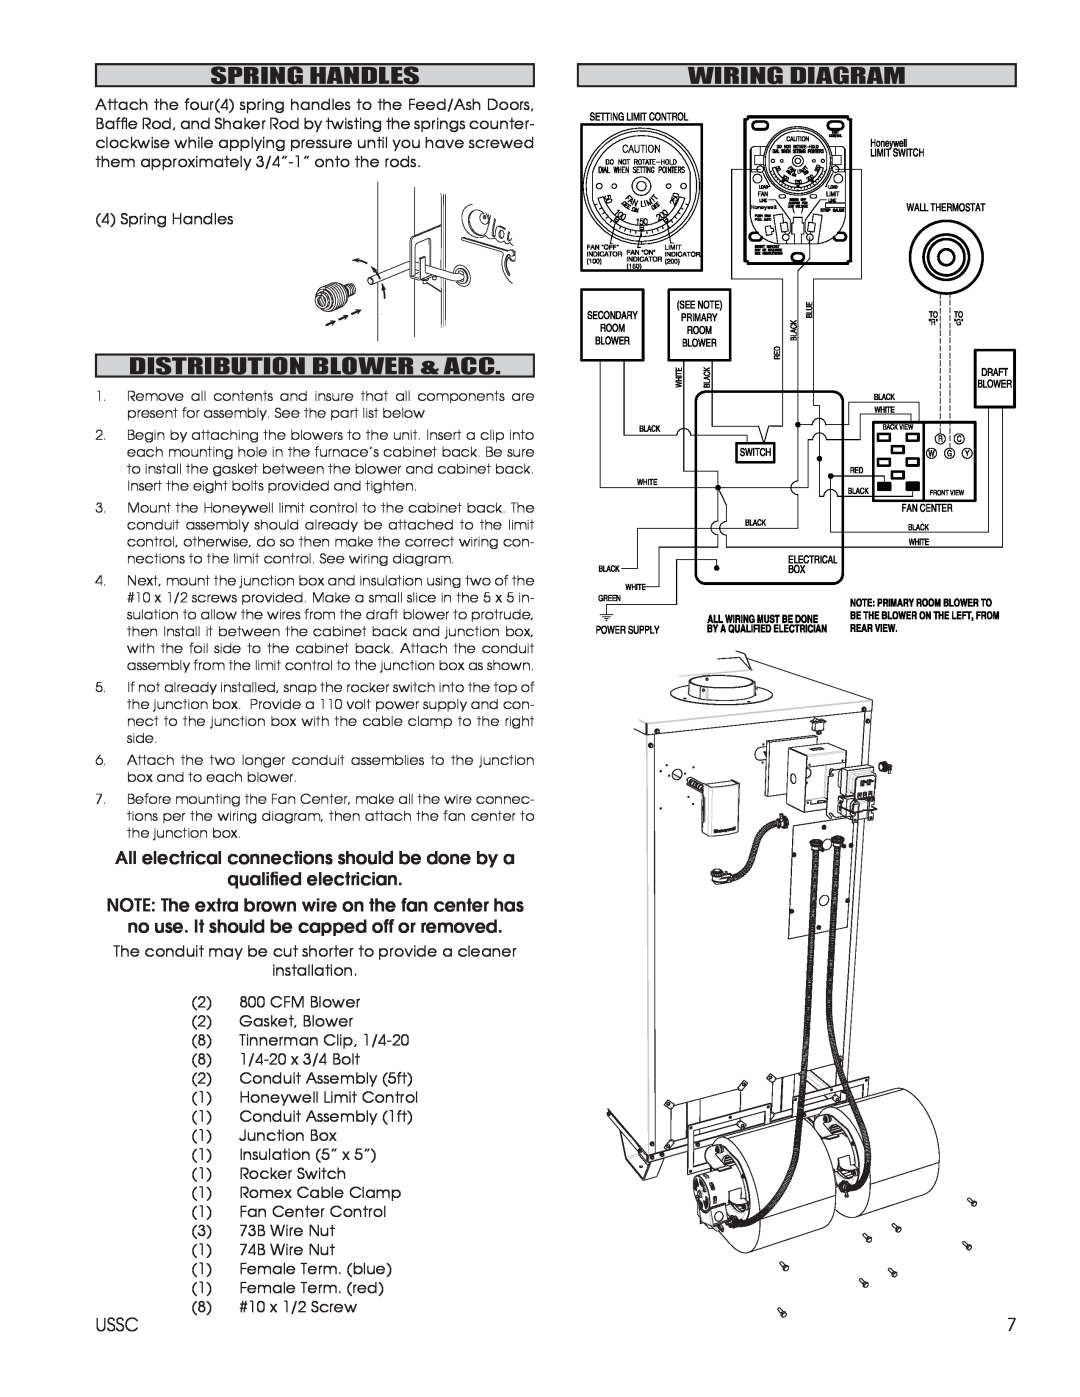 United States Stove 1602G, 1802G Spring Handles, Distribution Blower & Acc, Wiring Diagram, qualified electrician 